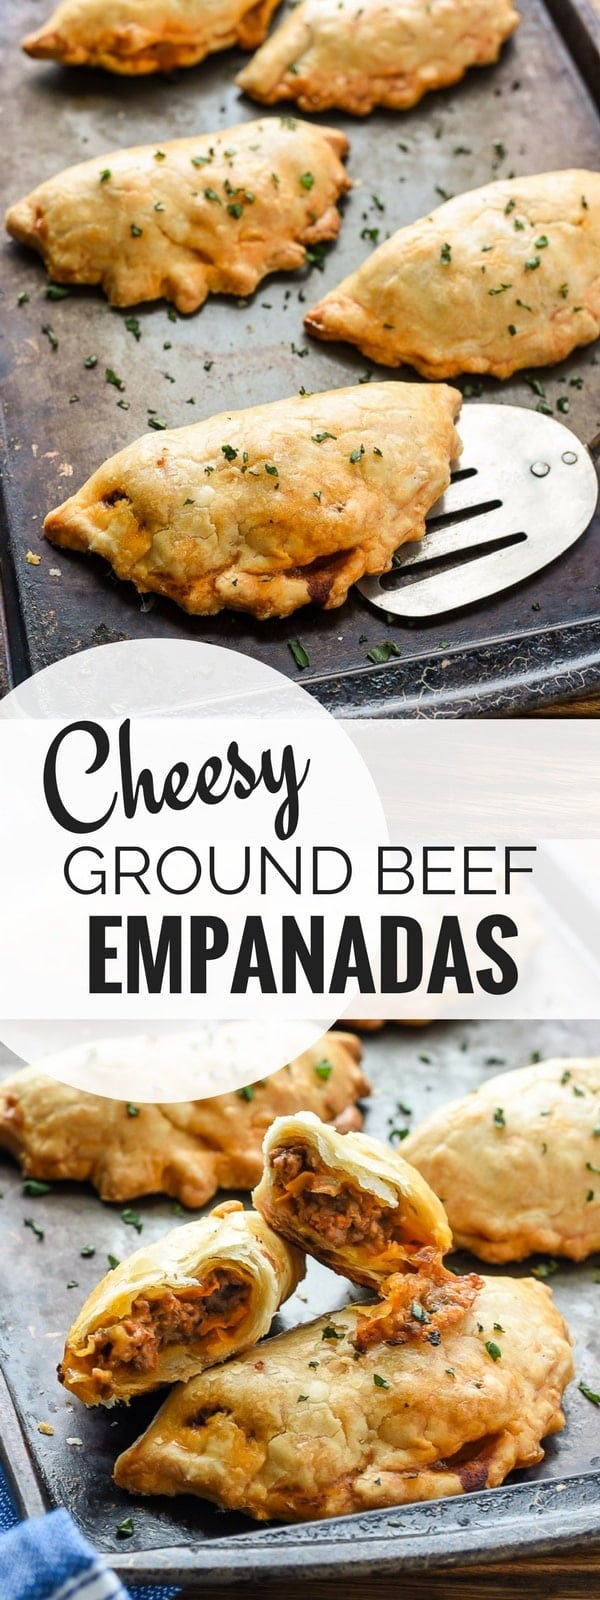 Cheesy Ground Beef Empanadas are a fun, easy, and filling meal that's great for dinner or for packing in school lunches!